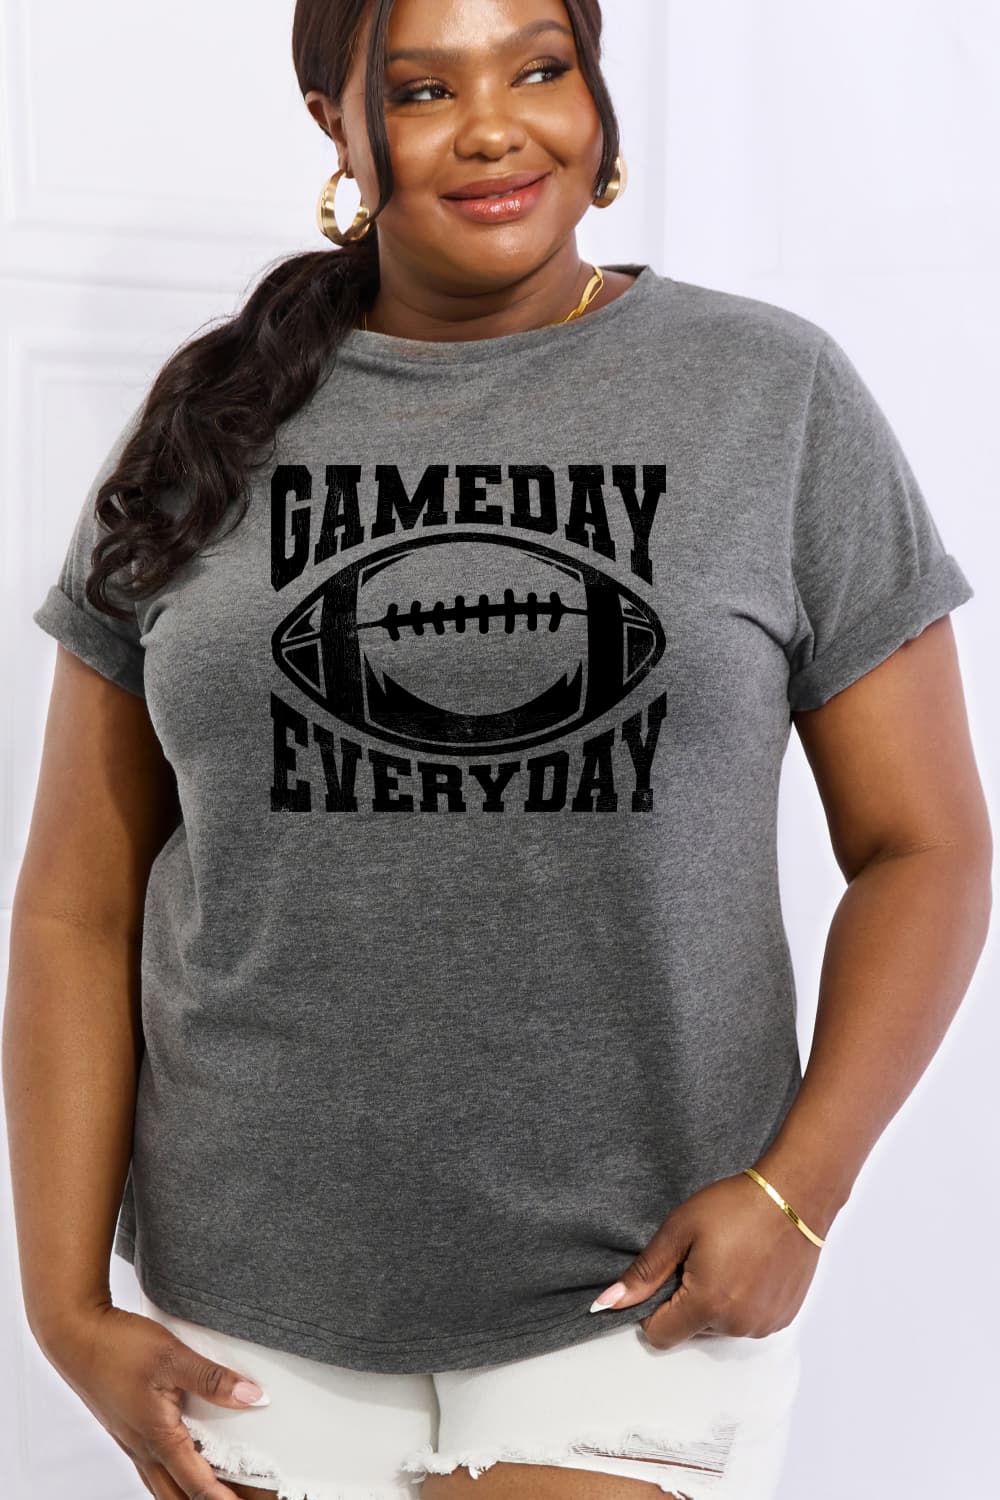 Full Size GAMEDAY EVERYDAY Graphic Cotton Tee